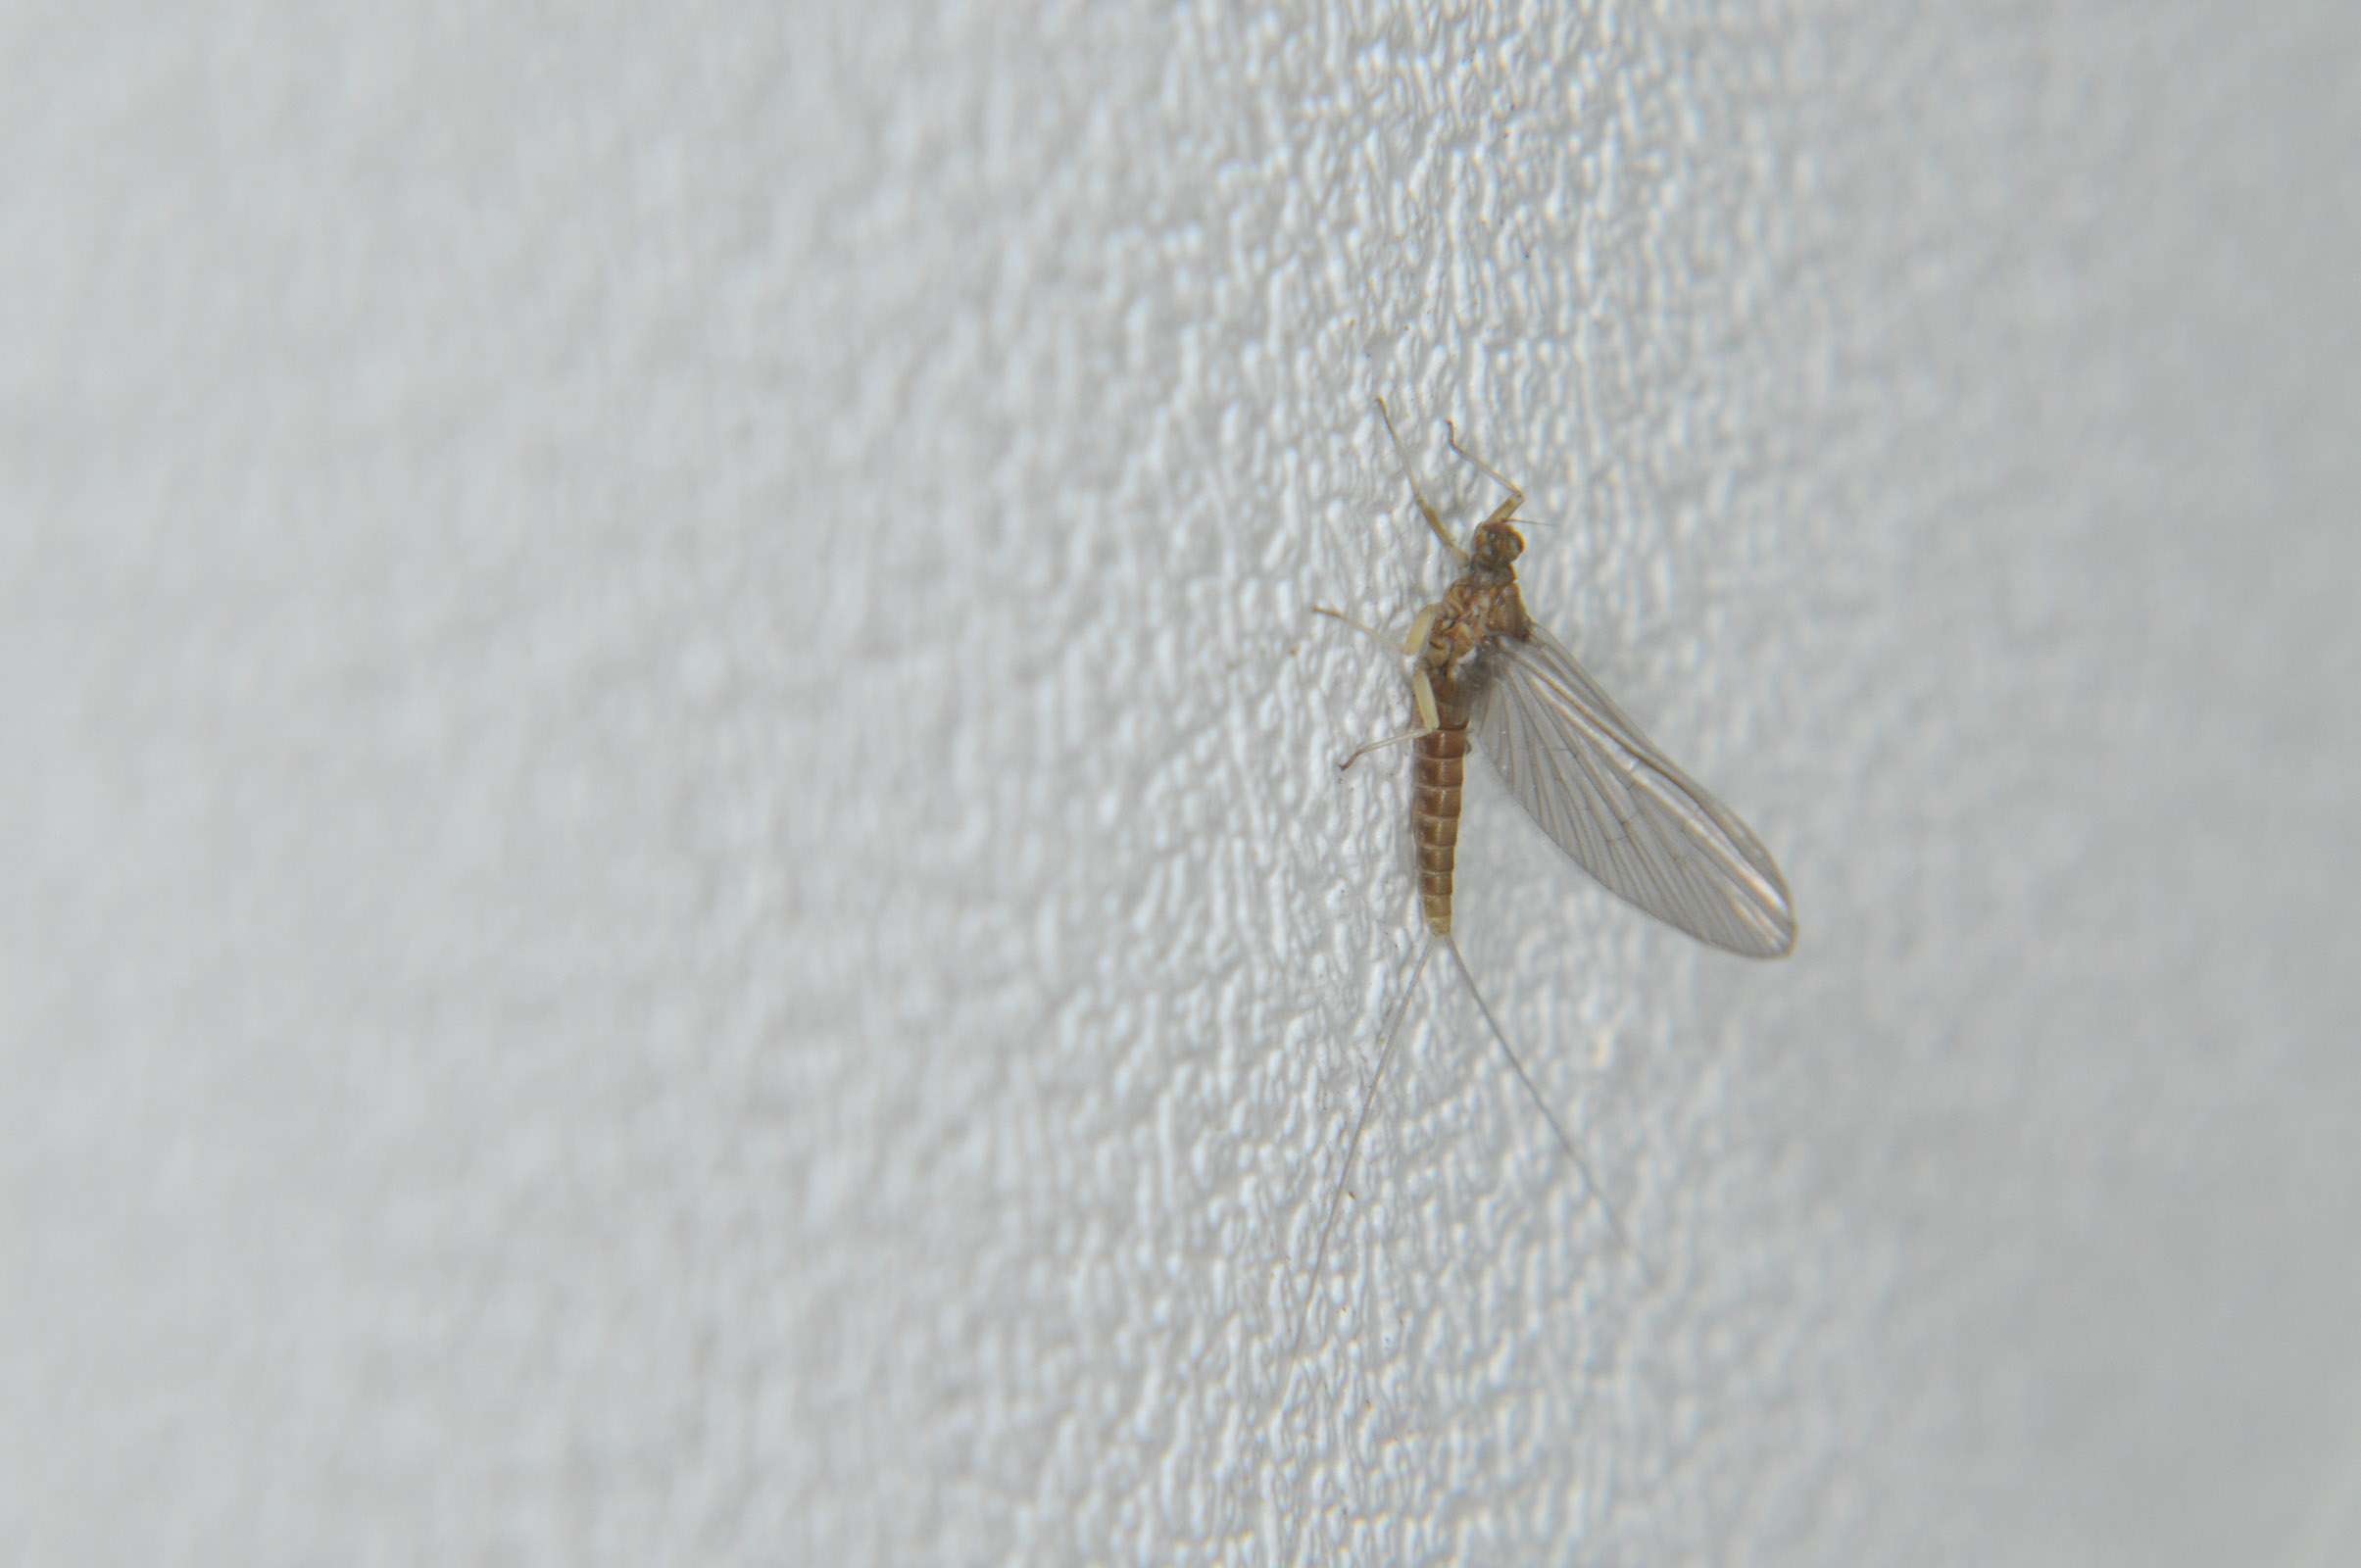 Female Baetis (Blue-Winged Olives) Mayfly Dun from the Touchet River in Washington